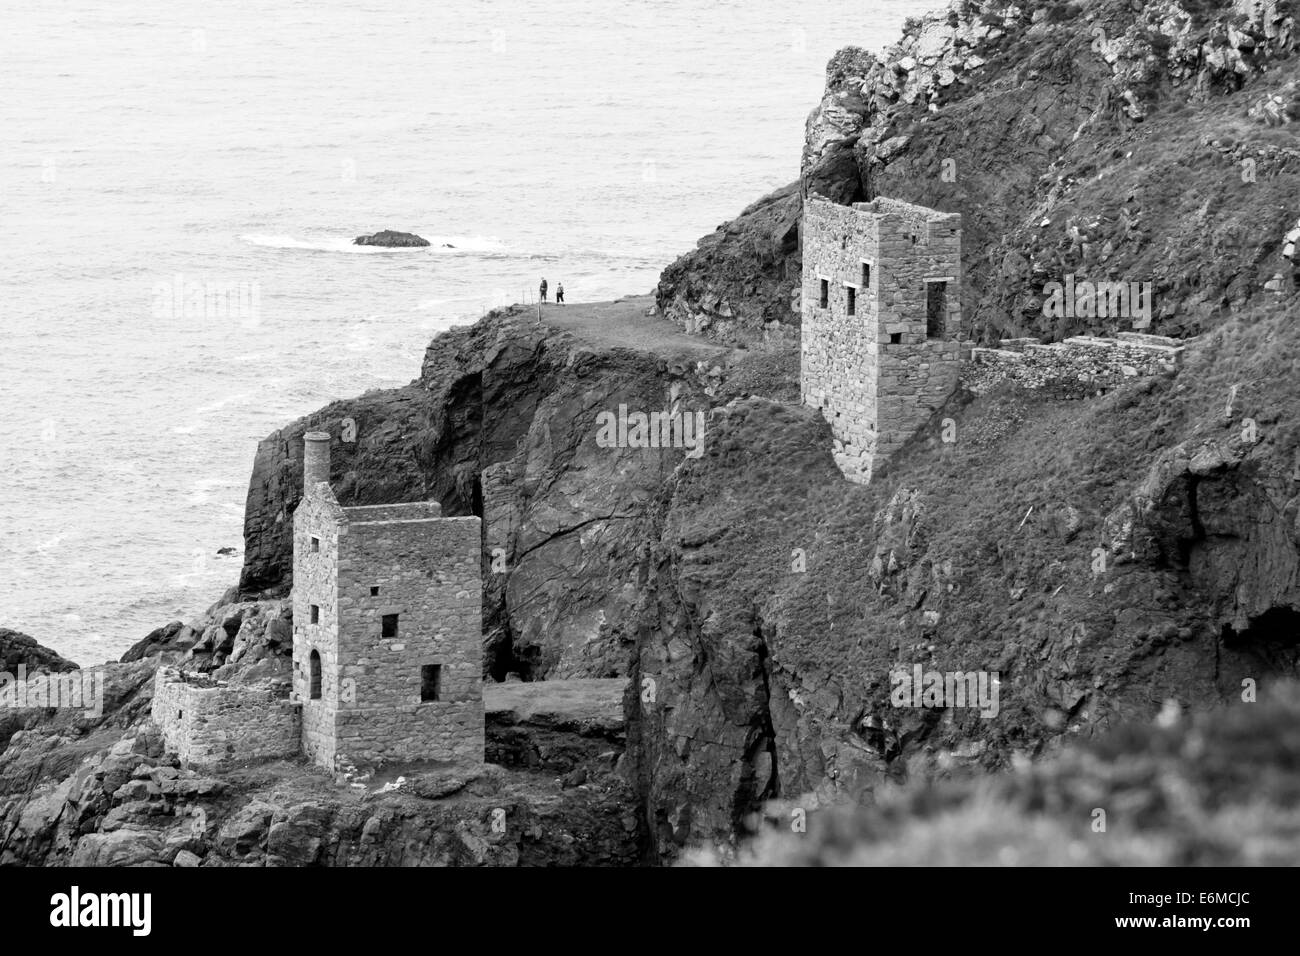 The ruins of the Crowns tin mine at Botallack Cornwall England UK. Stock Photo